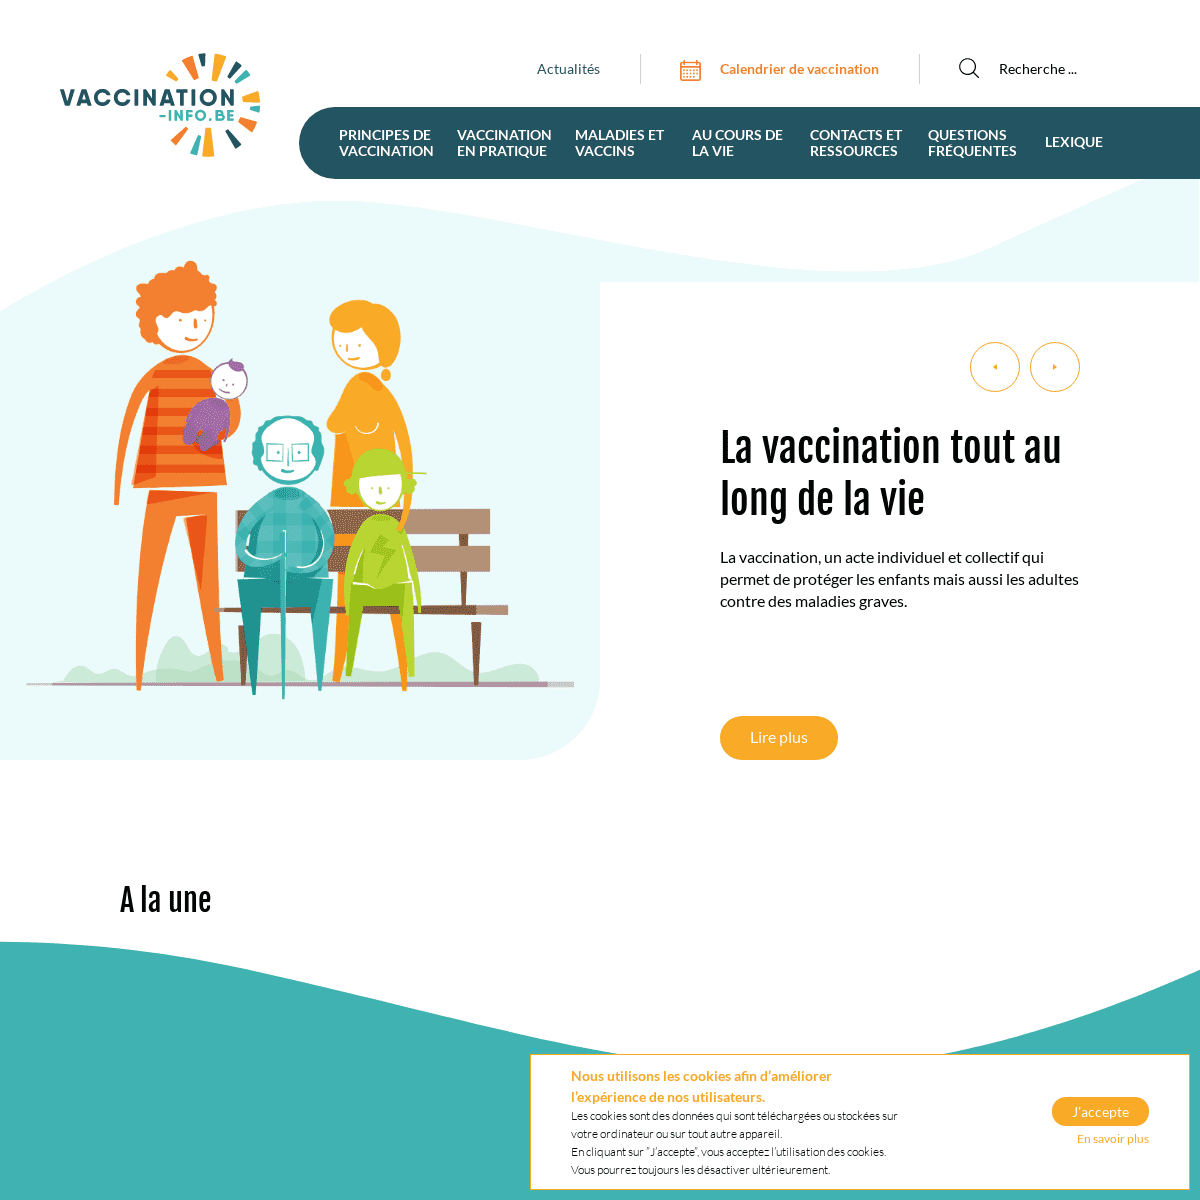 A complete backup of https://vaccination-info.be